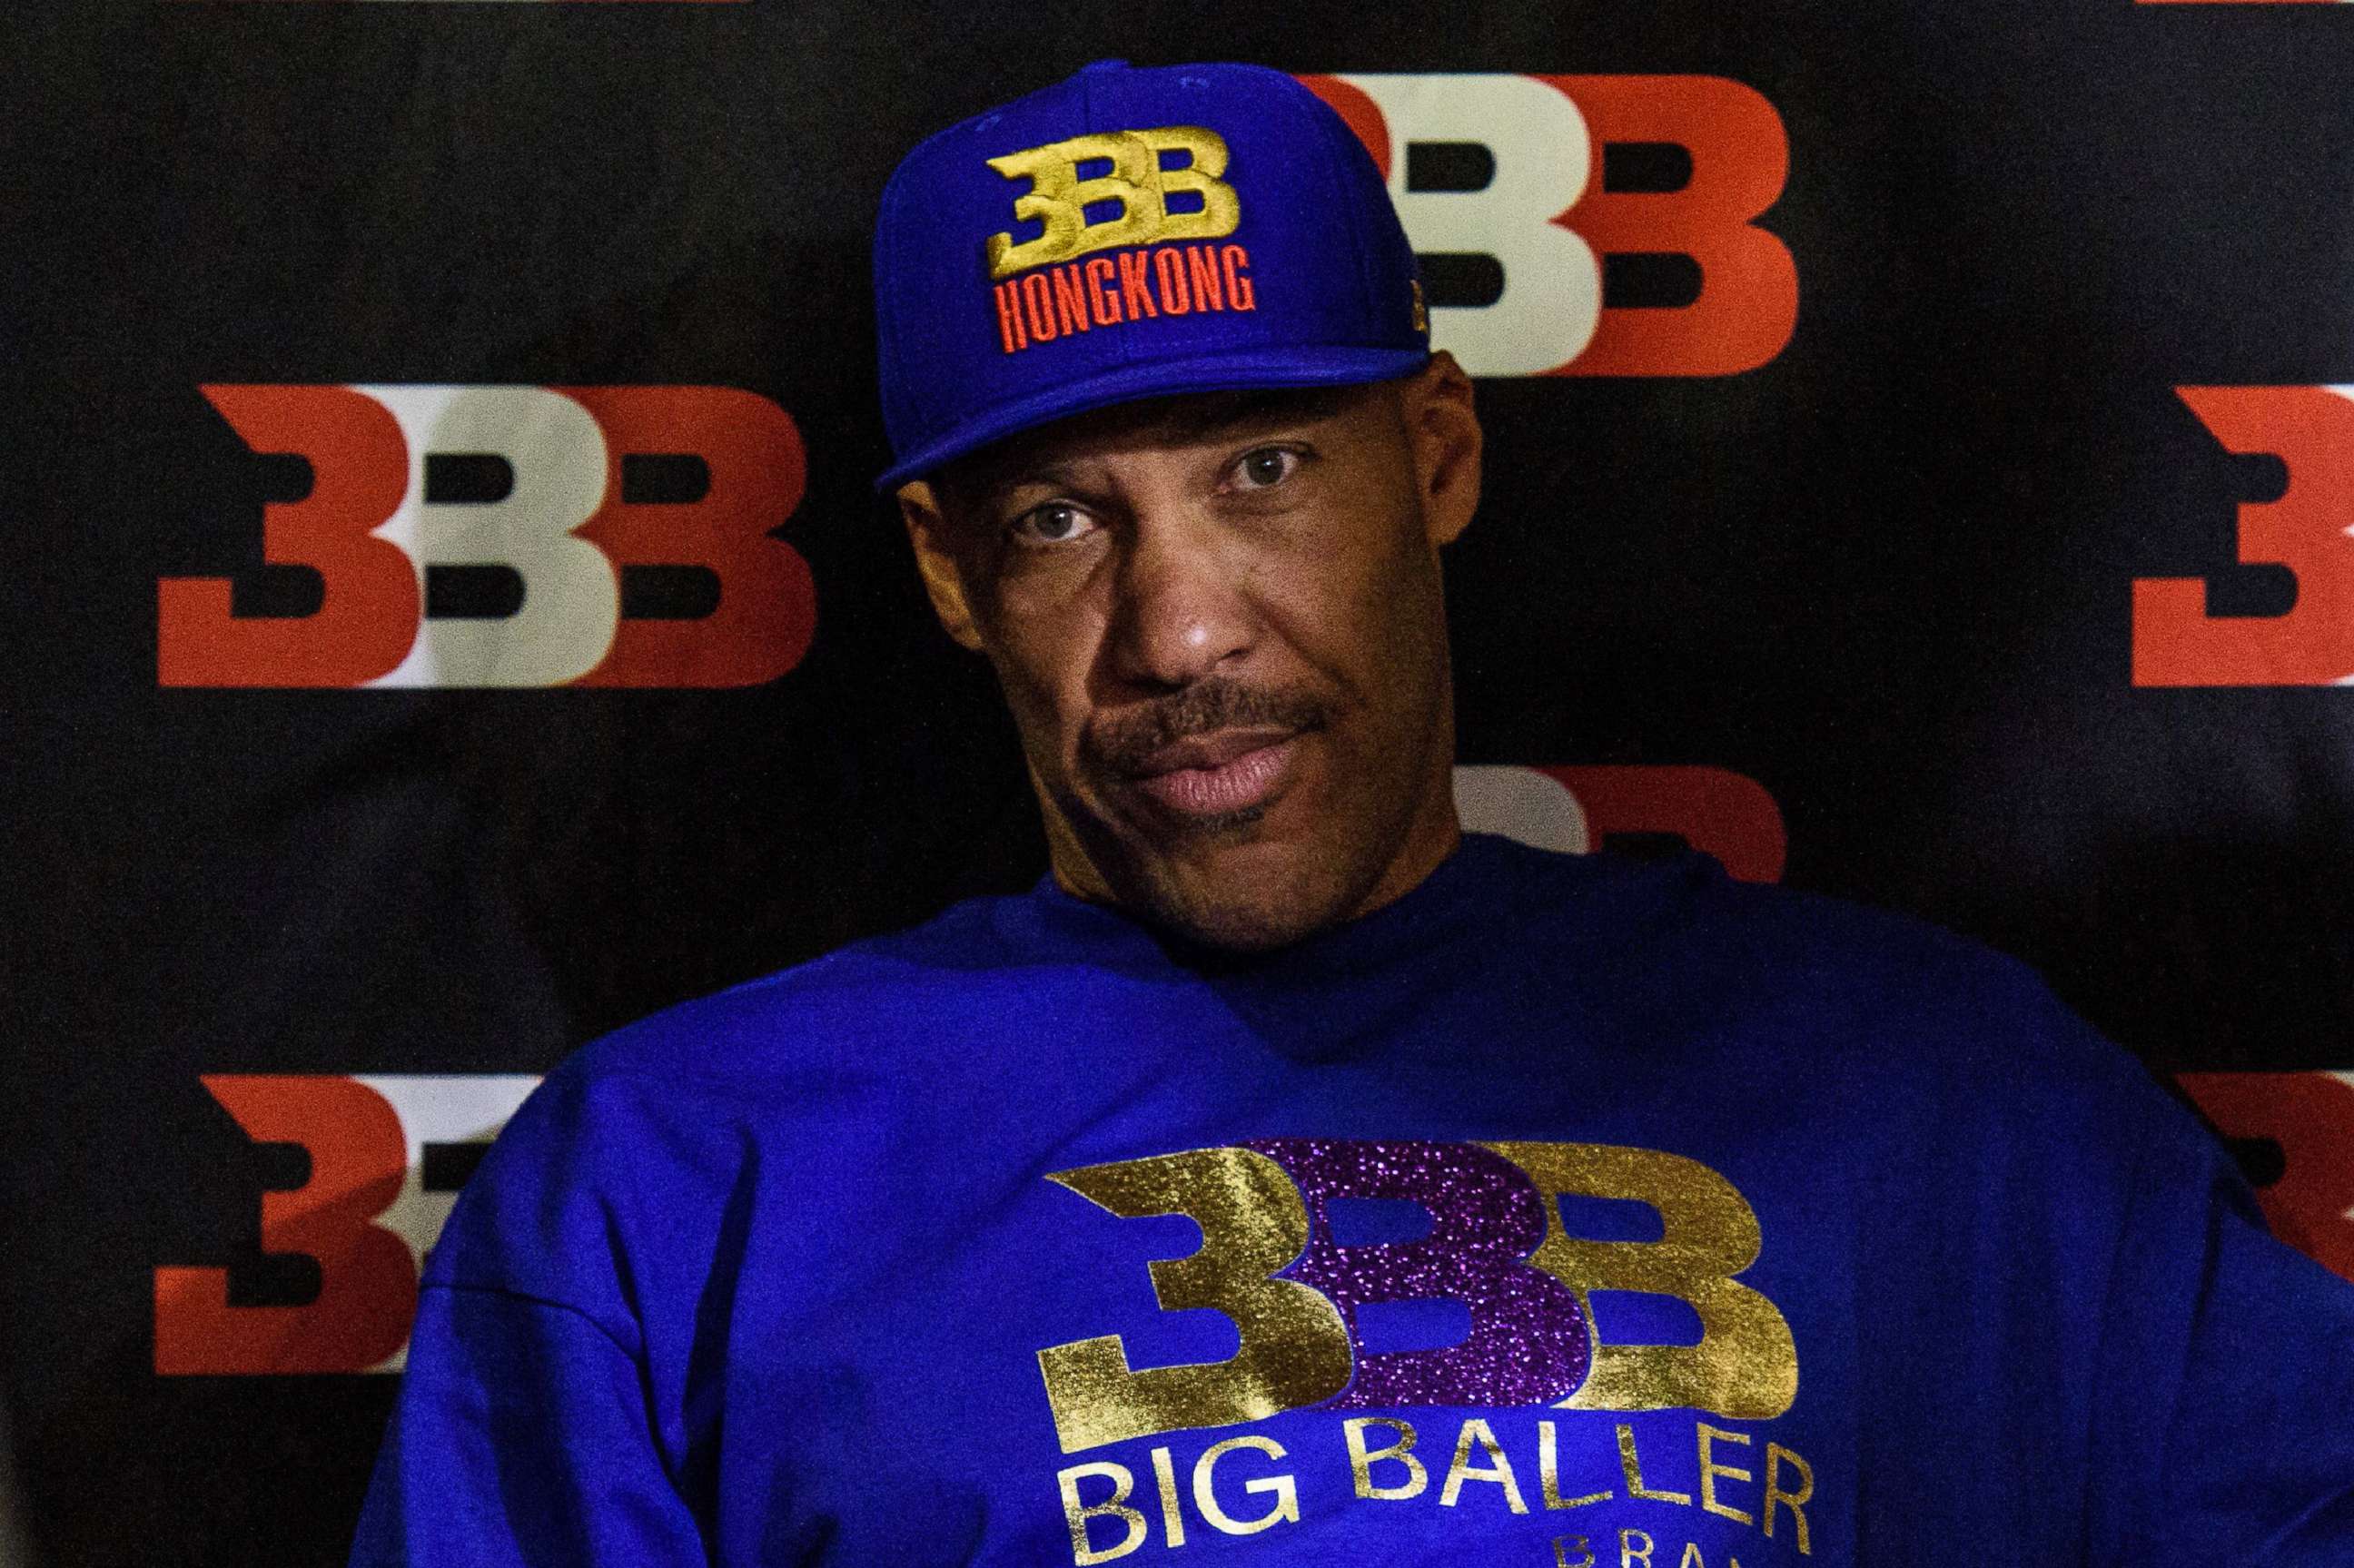 PHOTO: LaVar Ball, father of basketball player LiAngelo Ball and the owner of the Big Baller brand, attends a promotional event in Hong Kong, Nov. 14, 2017.
